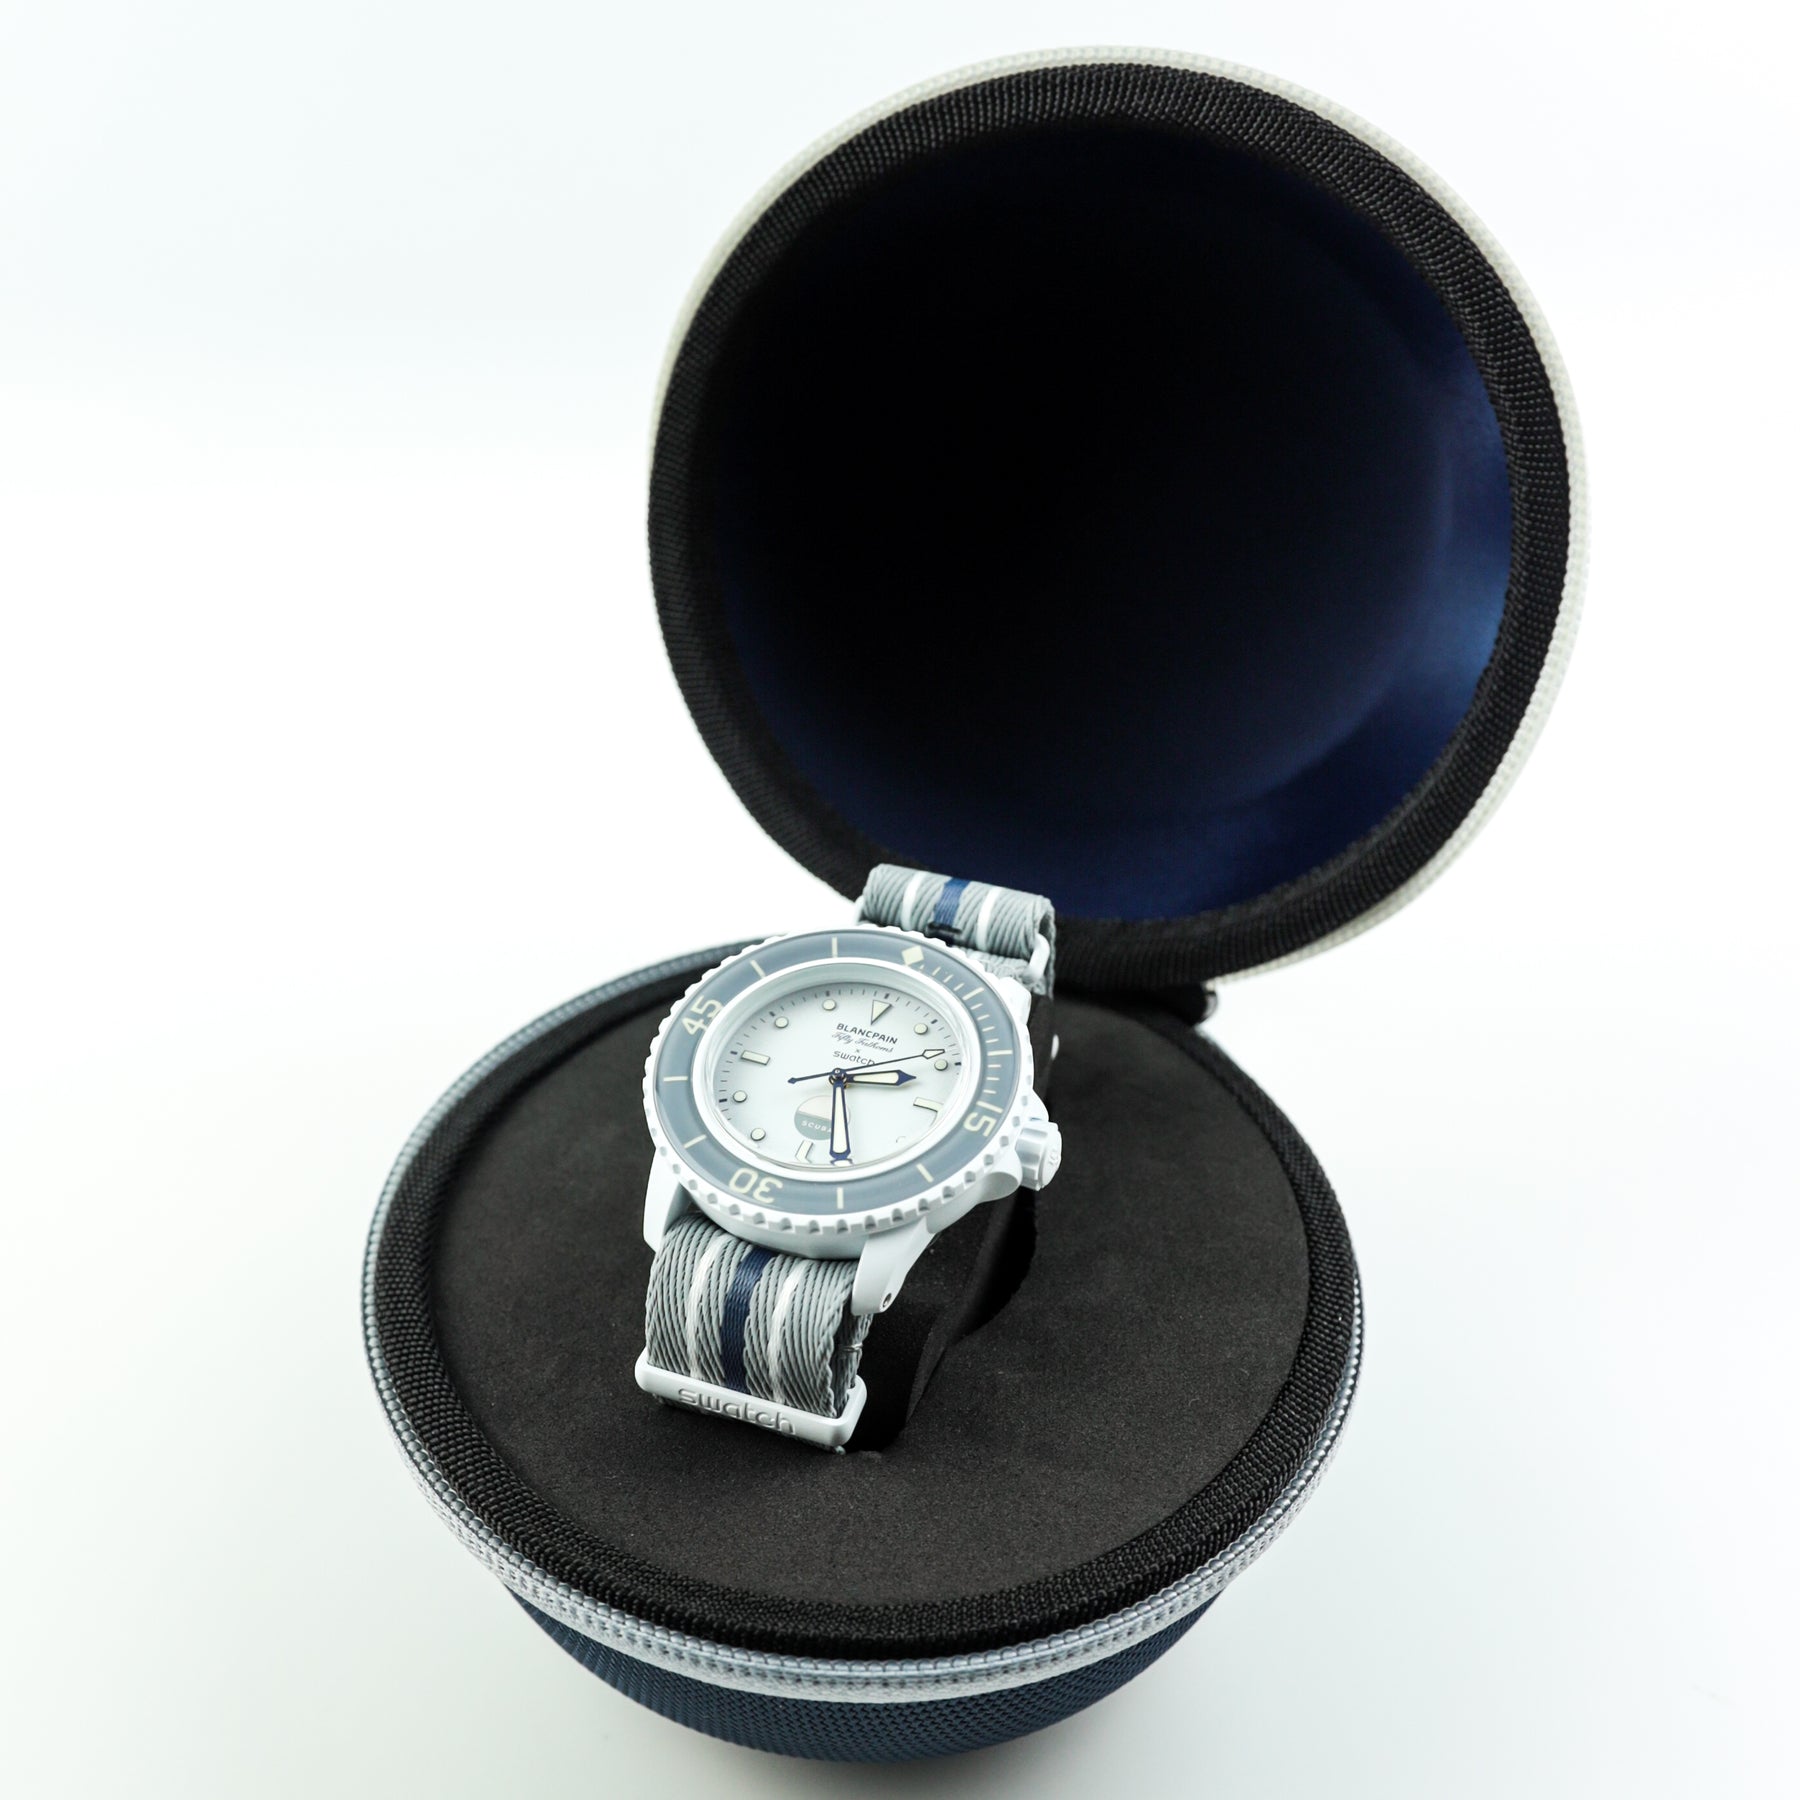 Unworn Pre - Owned Blancpain X Swatch ANTARCTIC OCEAN Full set with box & papers AVAILABLE AT RR JEWELLERS YARM